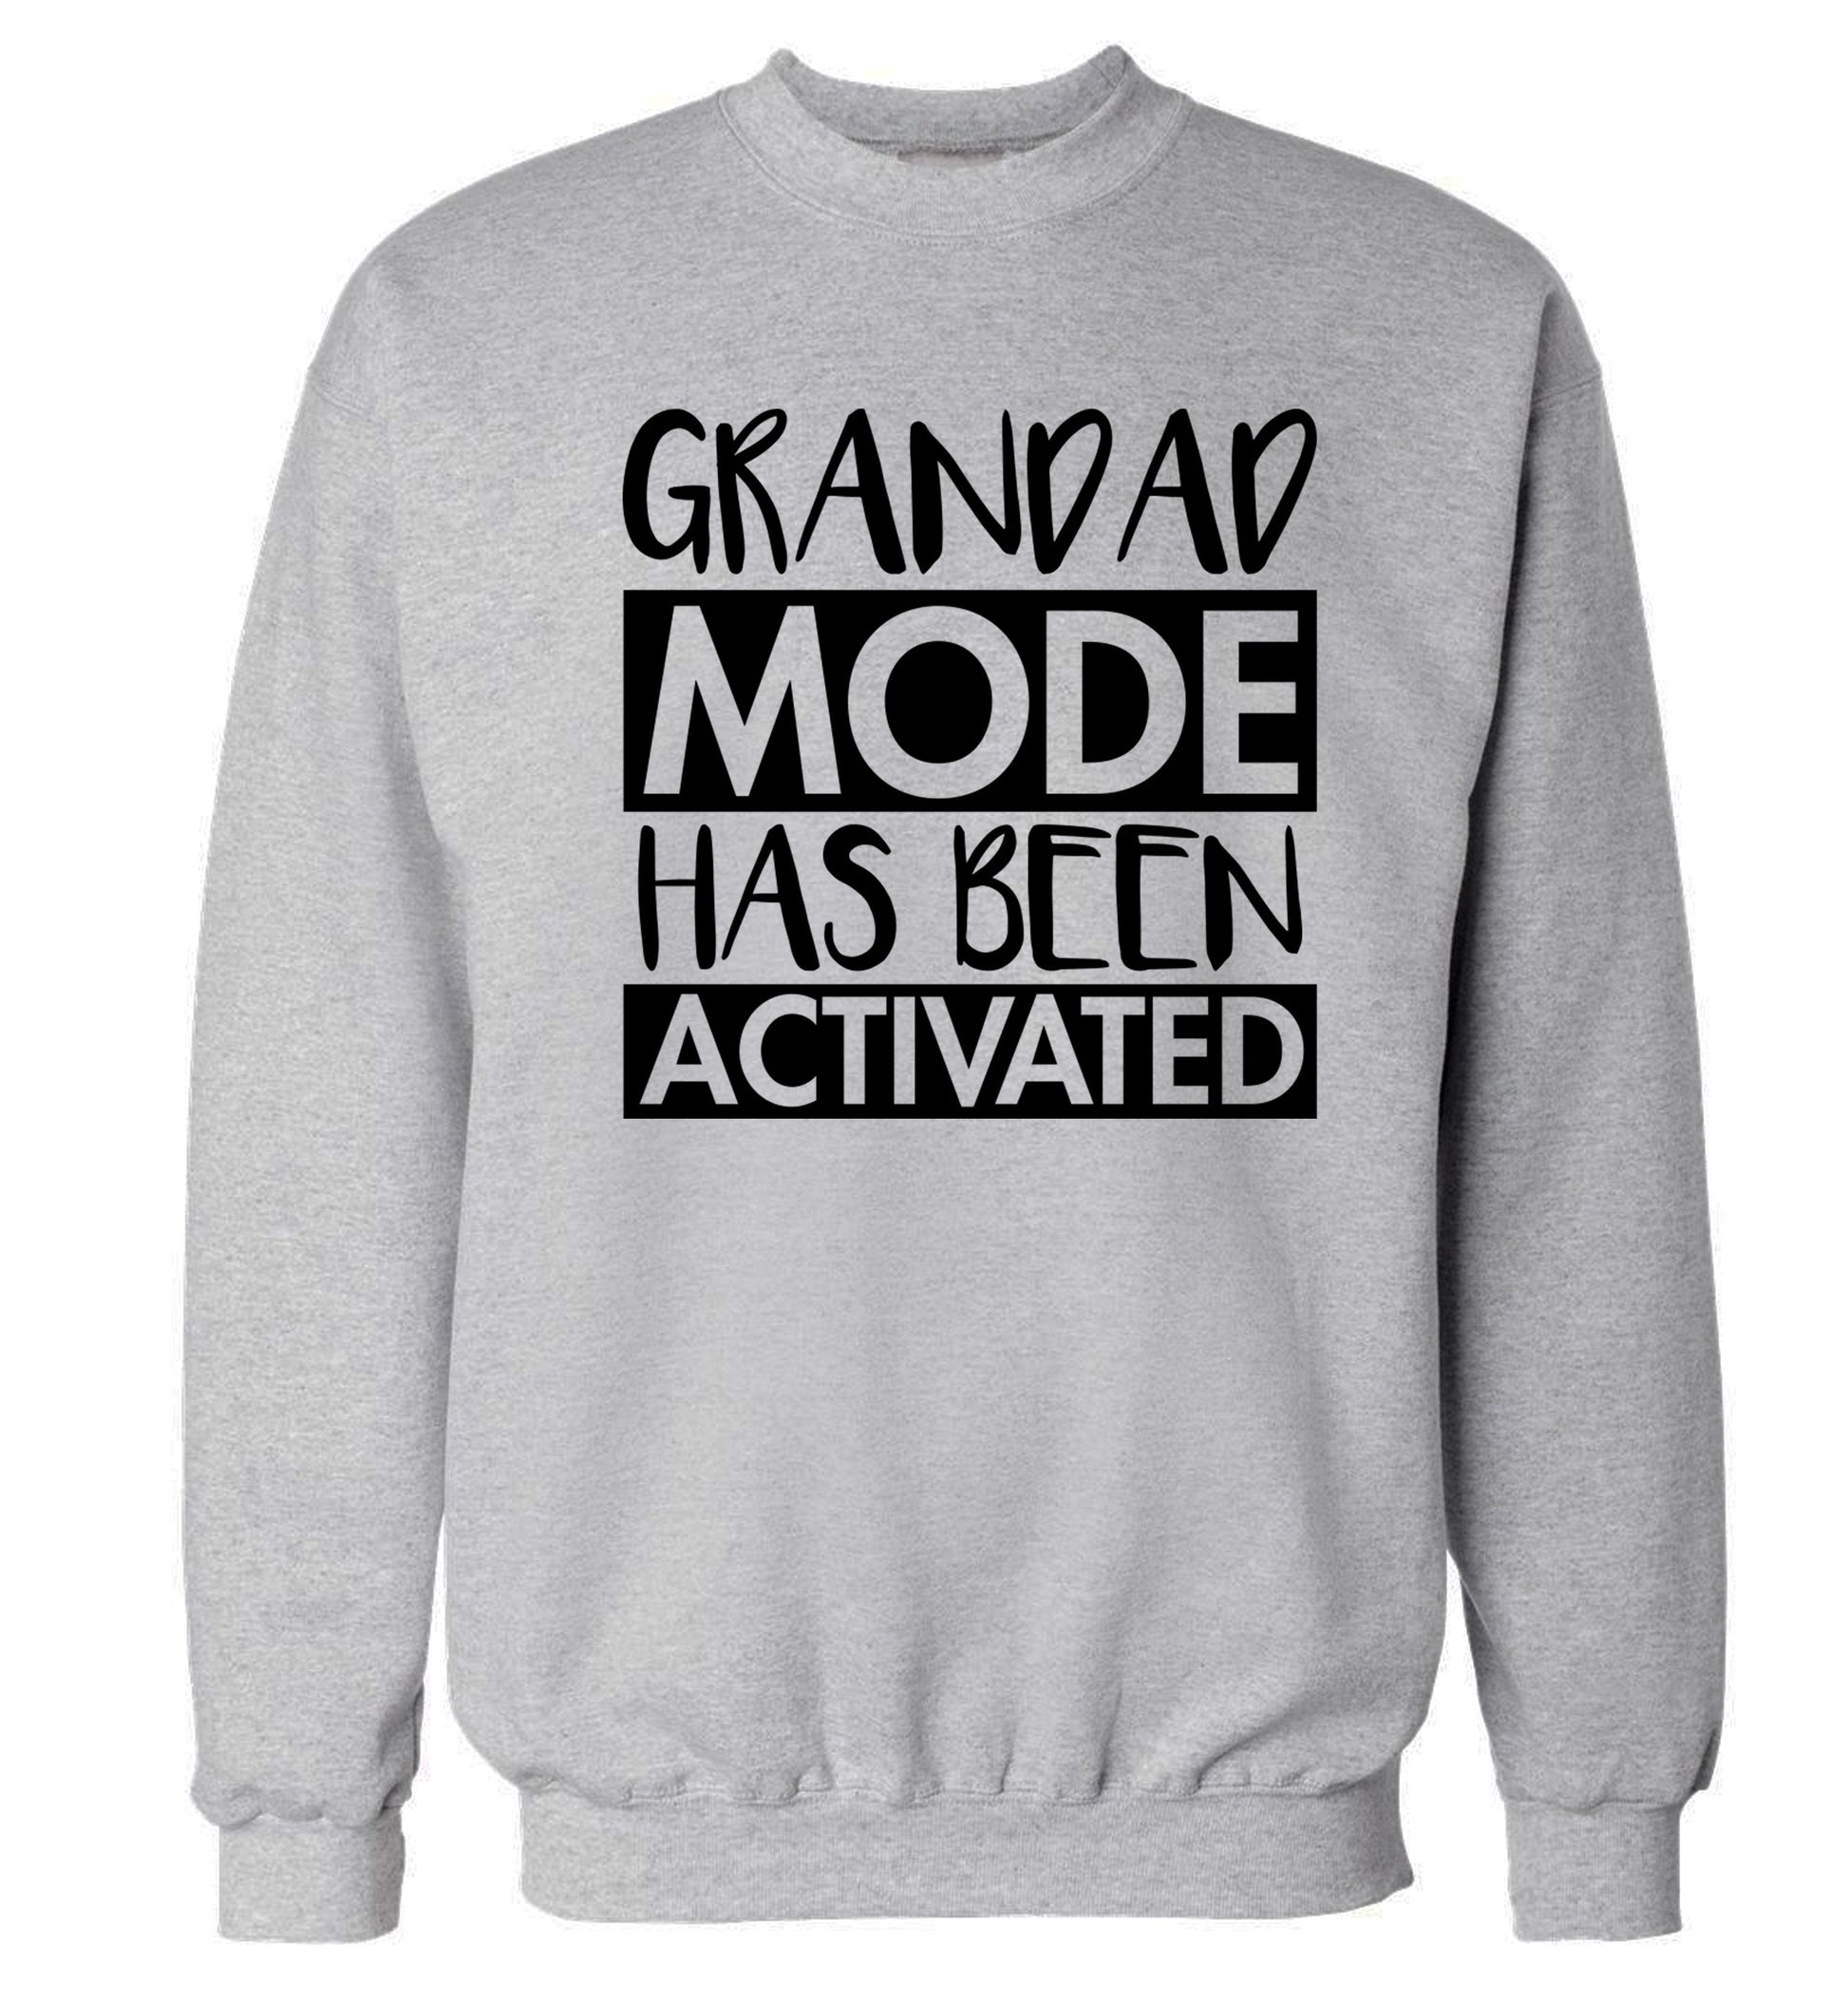 Grandad mode activated Adult's unisex grey Sweater 2XL